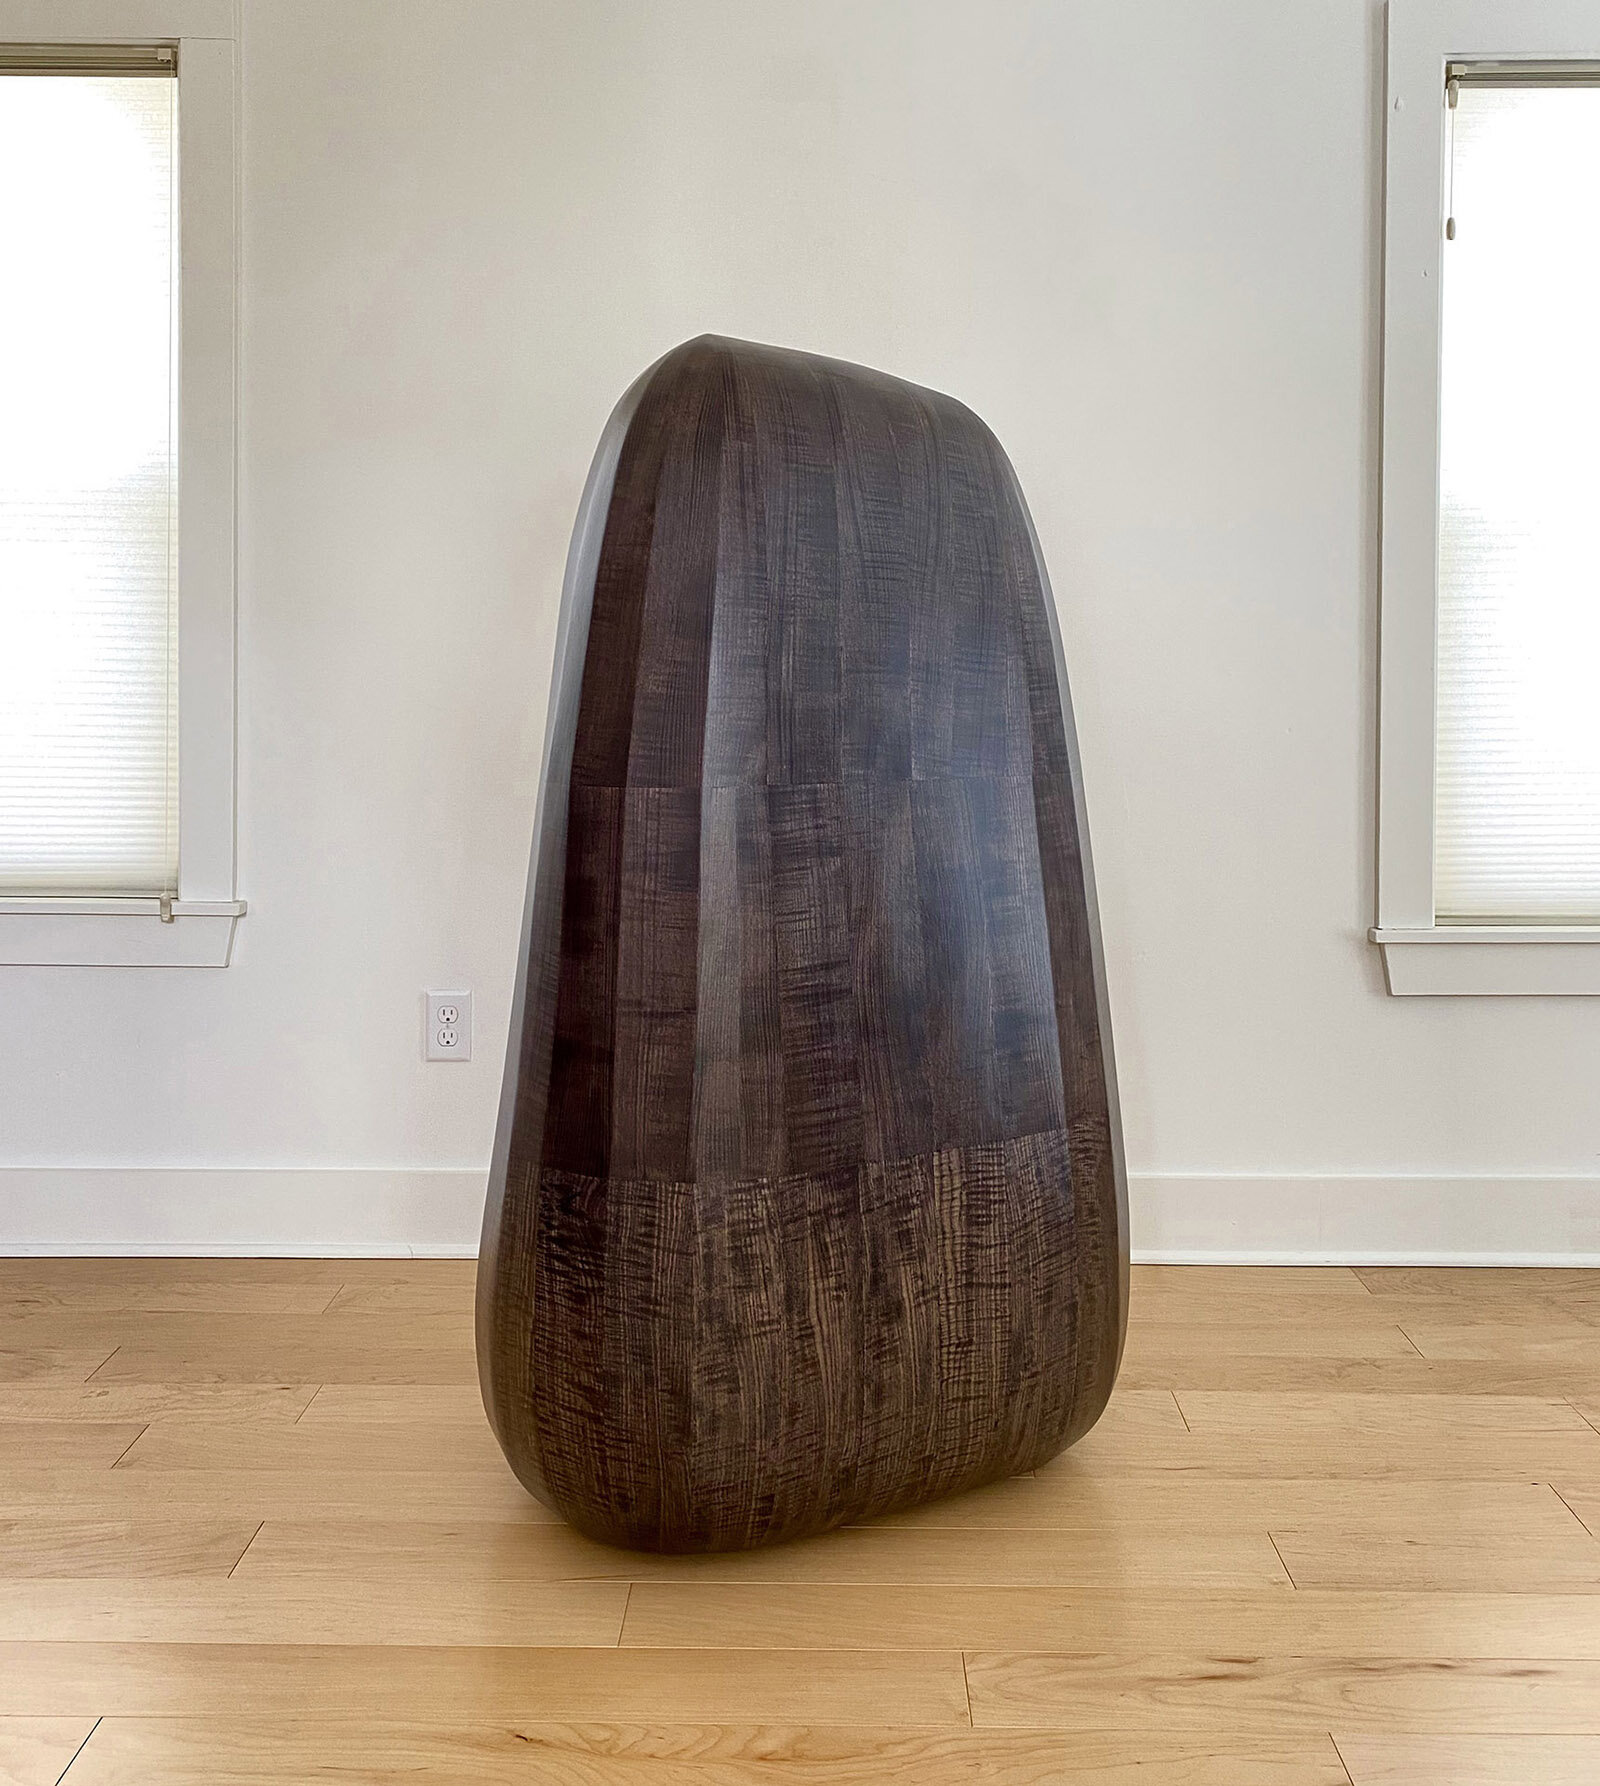  Steve Bartlett (United States, born 1961),  Bare Minimum,&nbsp; 2020, stained and varnished wood, 55 x 34 x 25 inches, Courtesy of the artist&nbsp; 